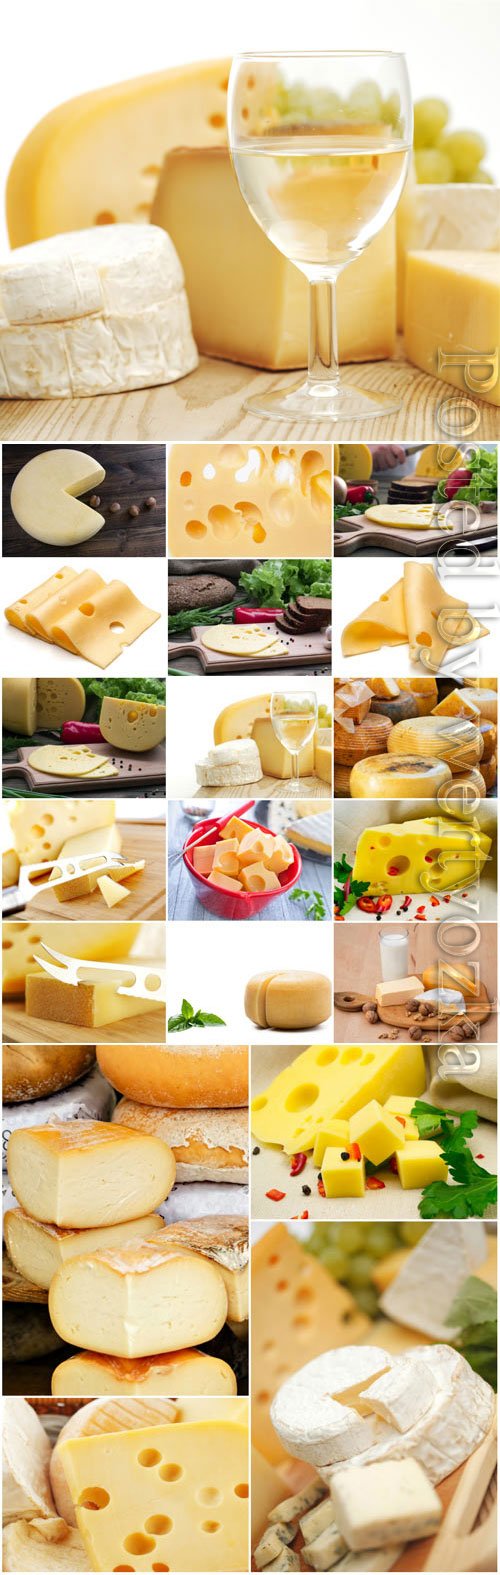 Cheese and glass of wine stock photo